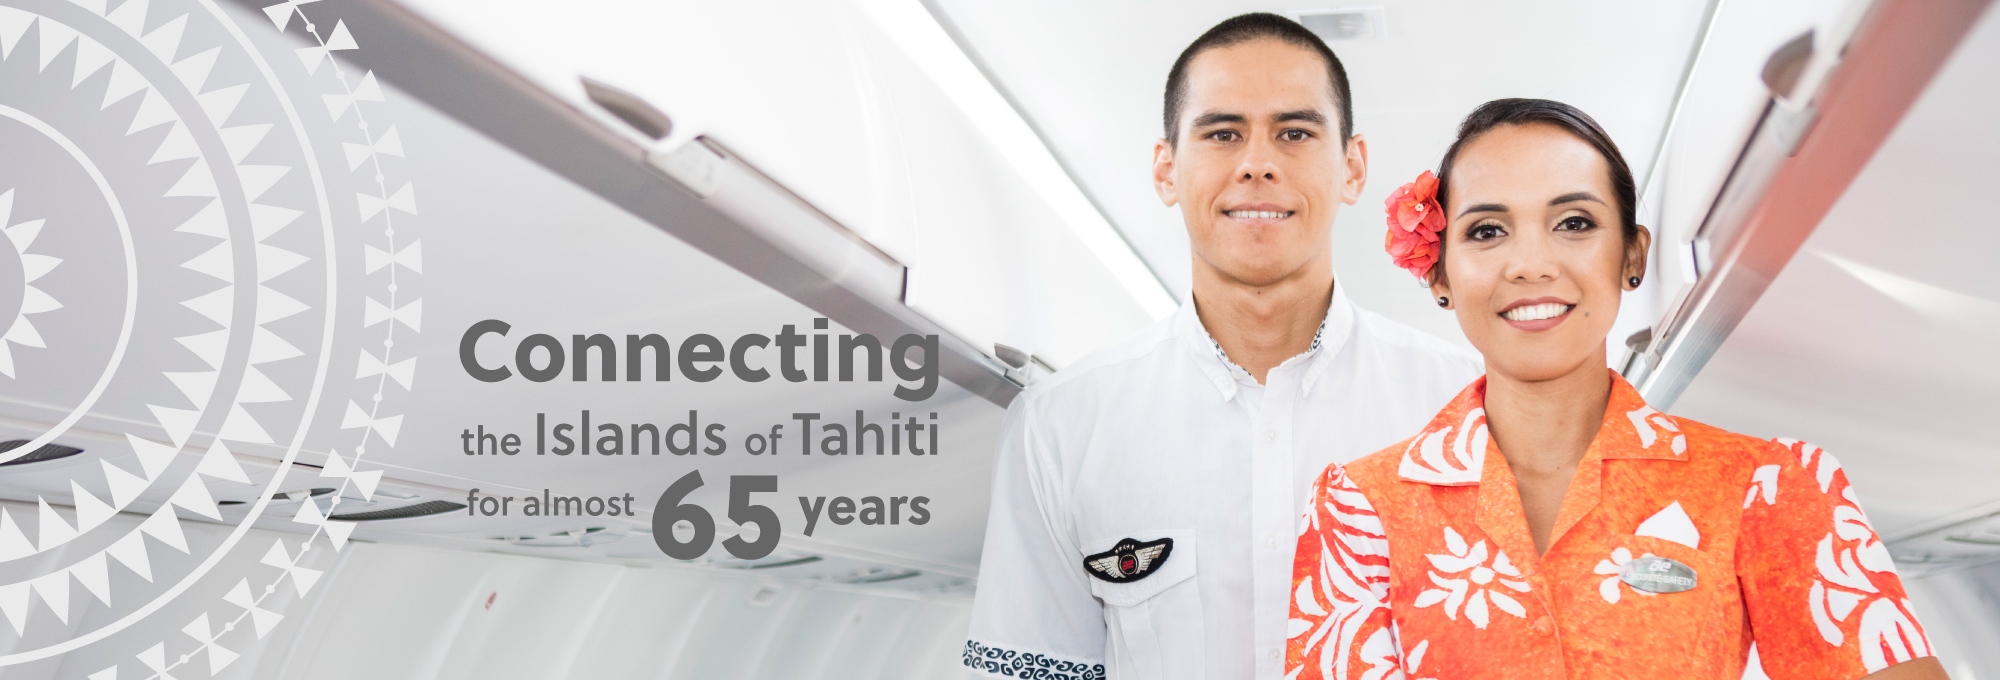 Connecting the islands of Tahiti for almost 65 years